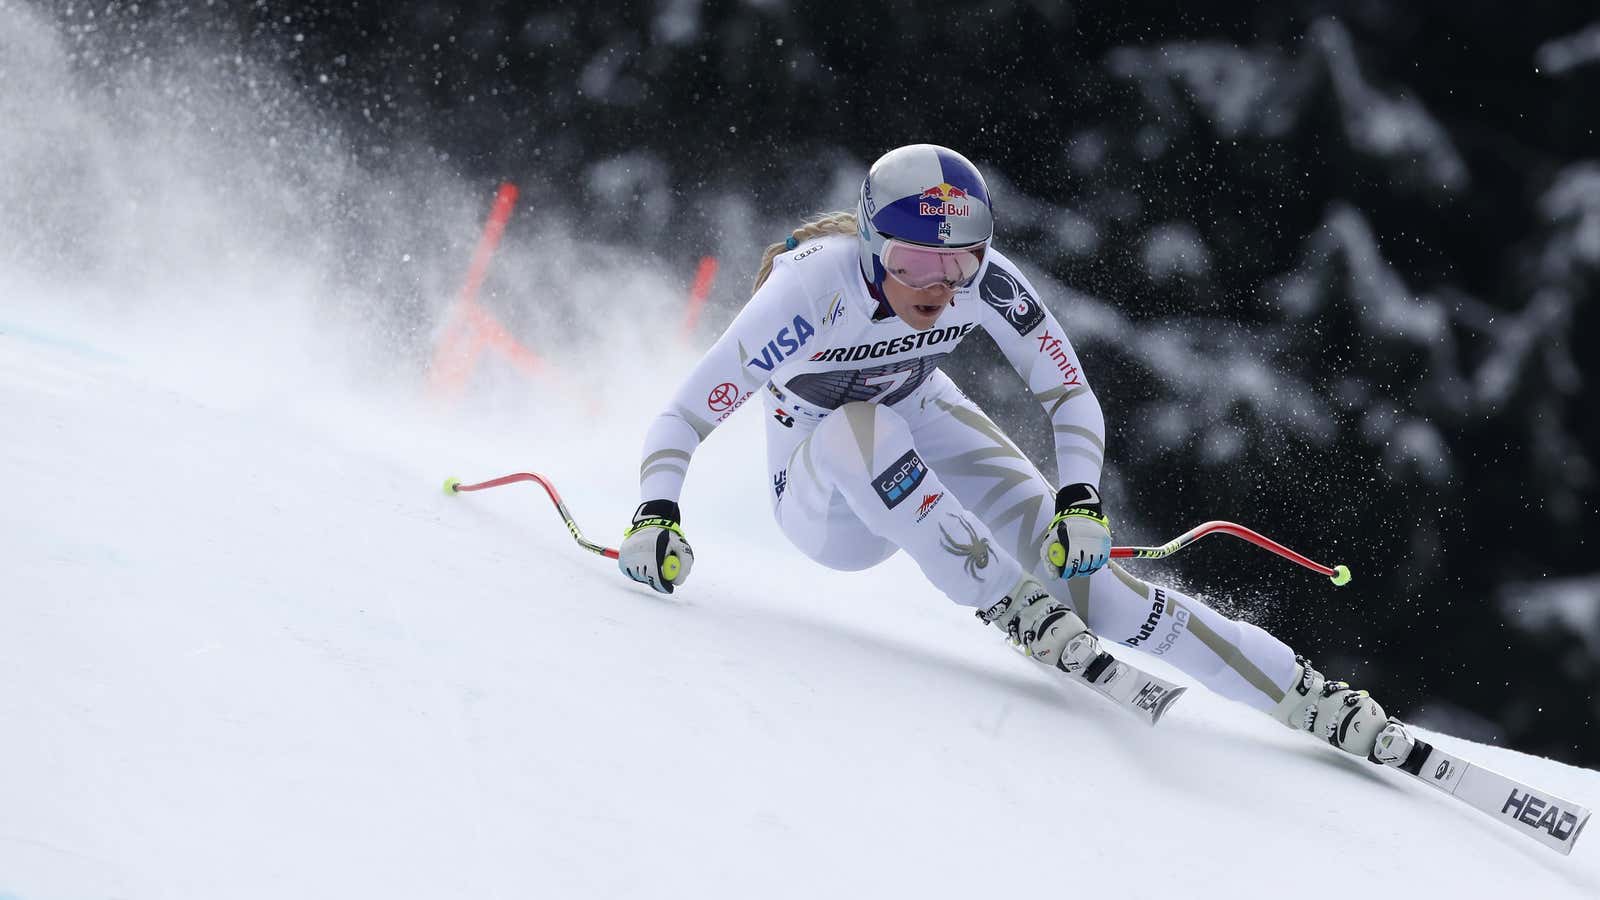 2018 Winter Olympics A guide to alpine skiing, Lindsey Vonn and Mikaela Shiffrins sport